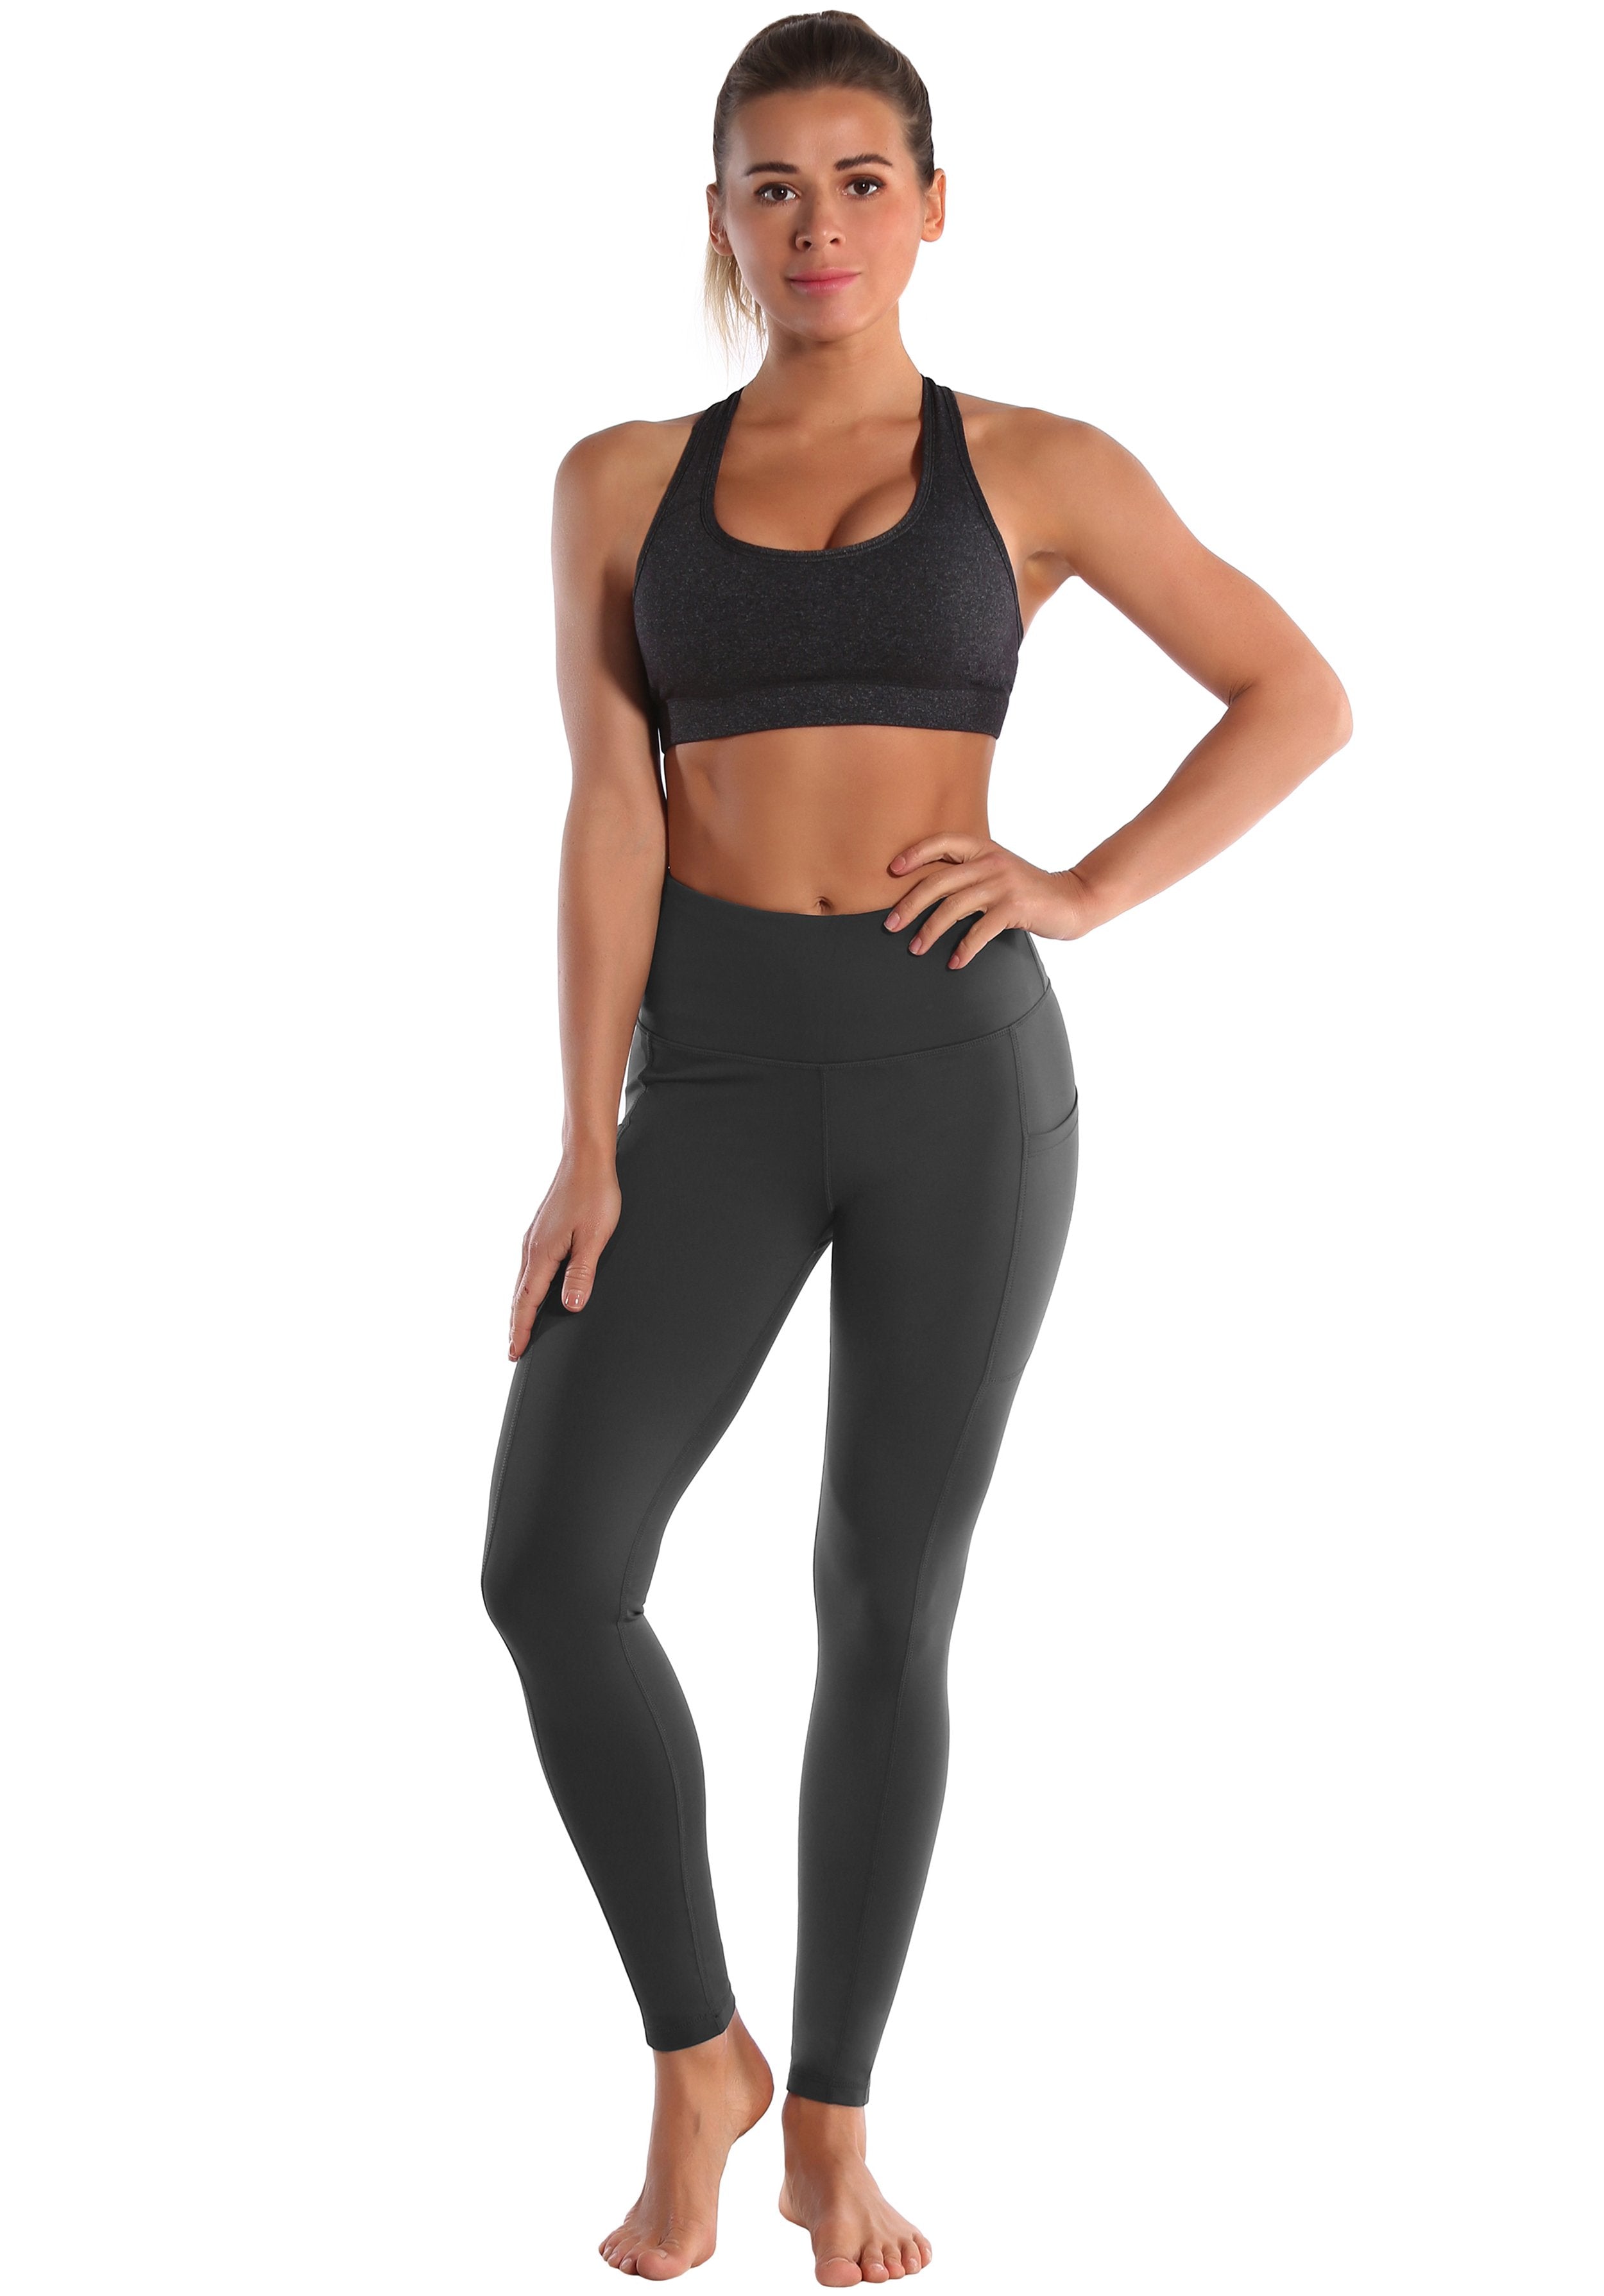 Hip Line Side Pockets Pilates Pants shadowcharcoal Sexy Hip Line Side Pockets 75%Nylon/25%Spandex Fabric doesn't attract lint easily 4-way stretch No see-through Moisture-wicking Tummy control Inner pocket Two lengths